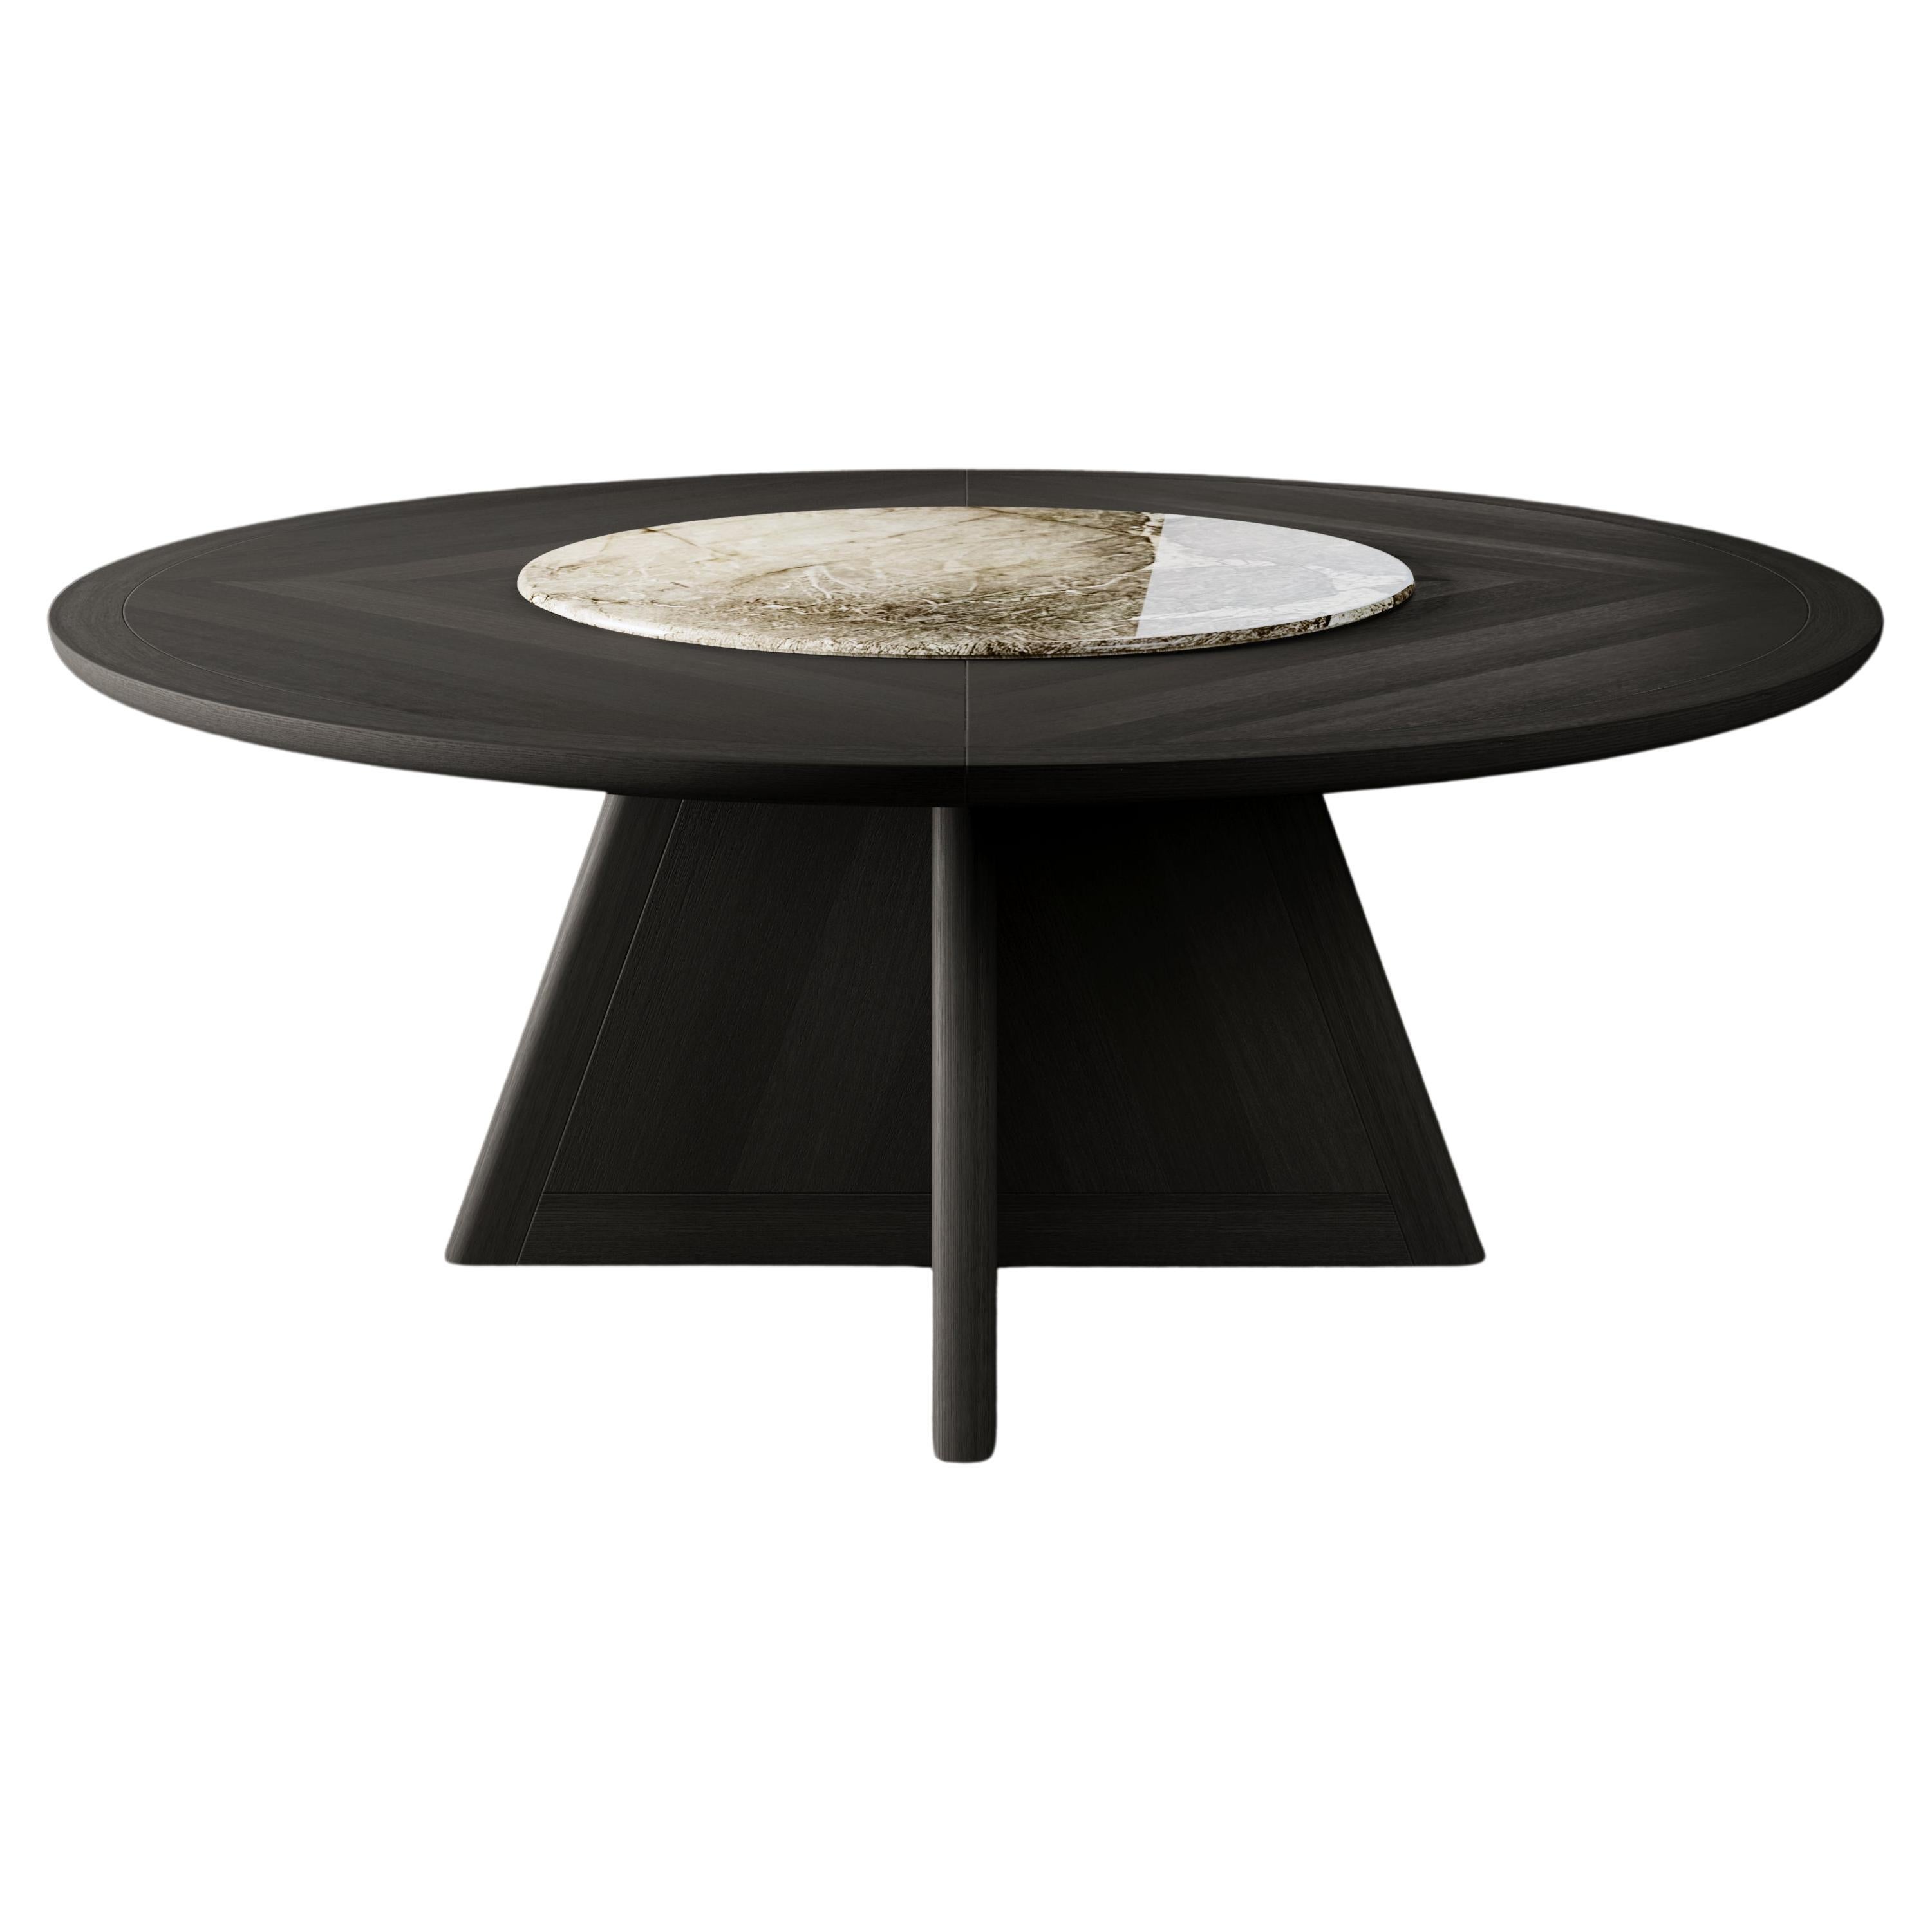 Vittorio dining table - READY TO SHIP For Sale